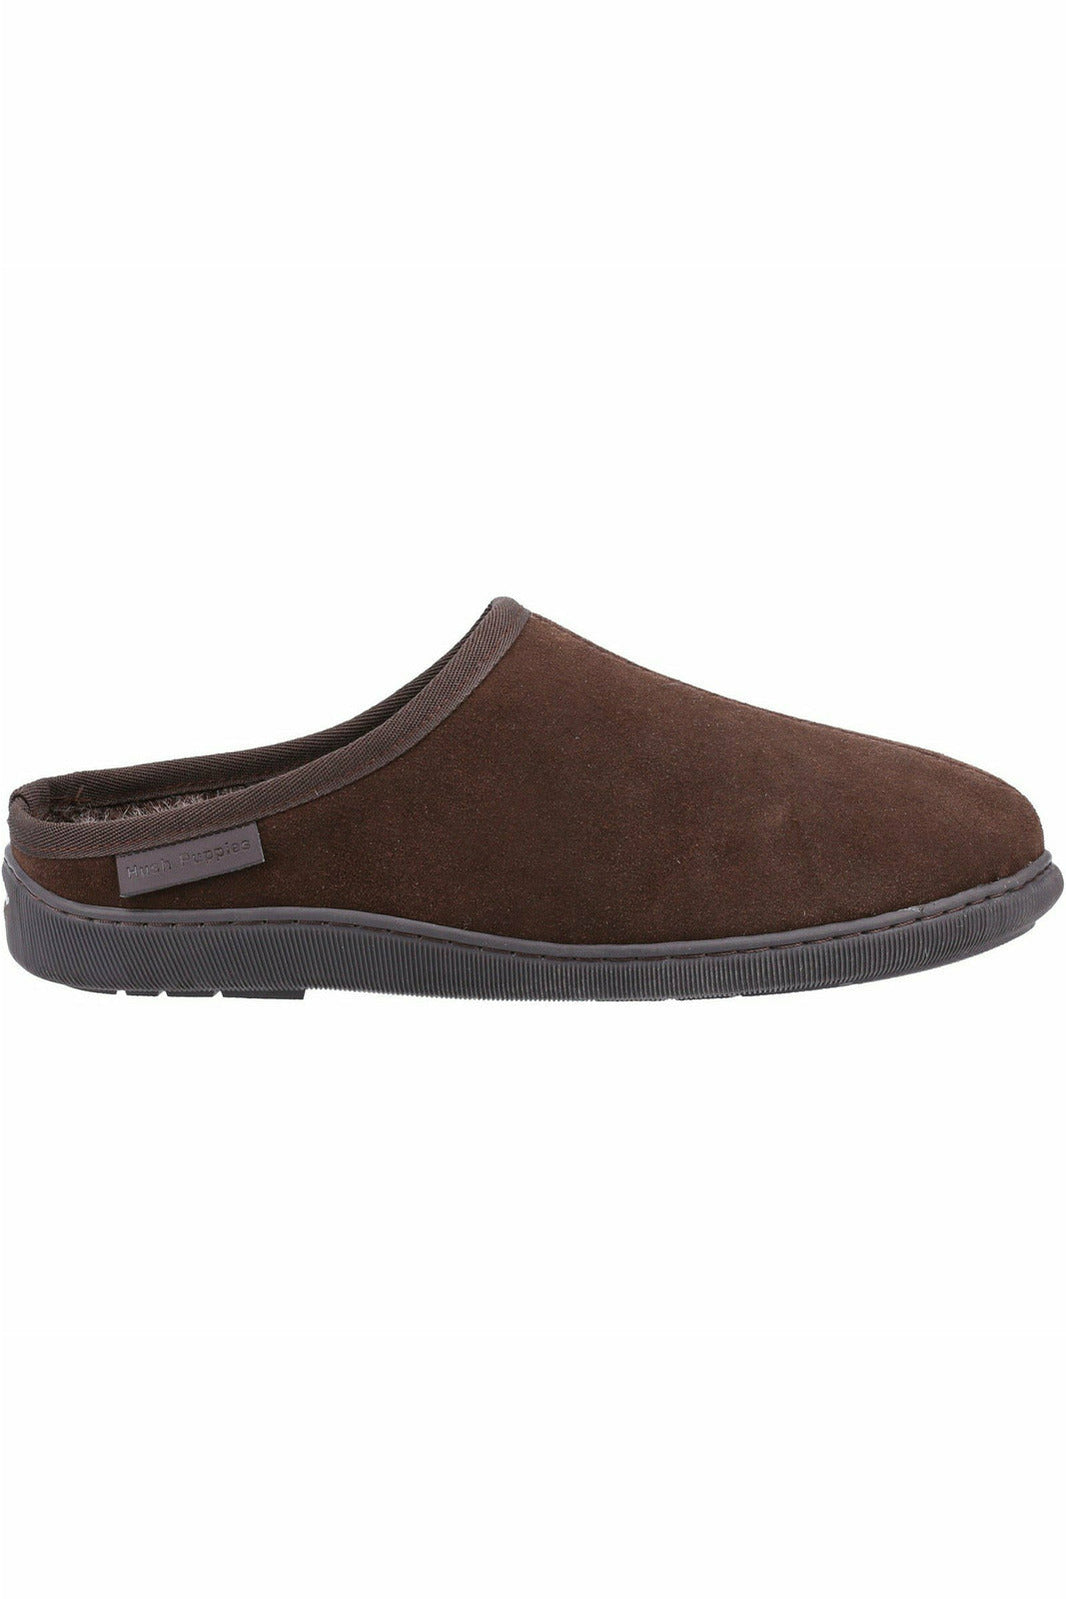 Hush Puppies Slip On Sandals For Men And Women | Hush Puppies Tread Slippers  | Shopee Malaysia